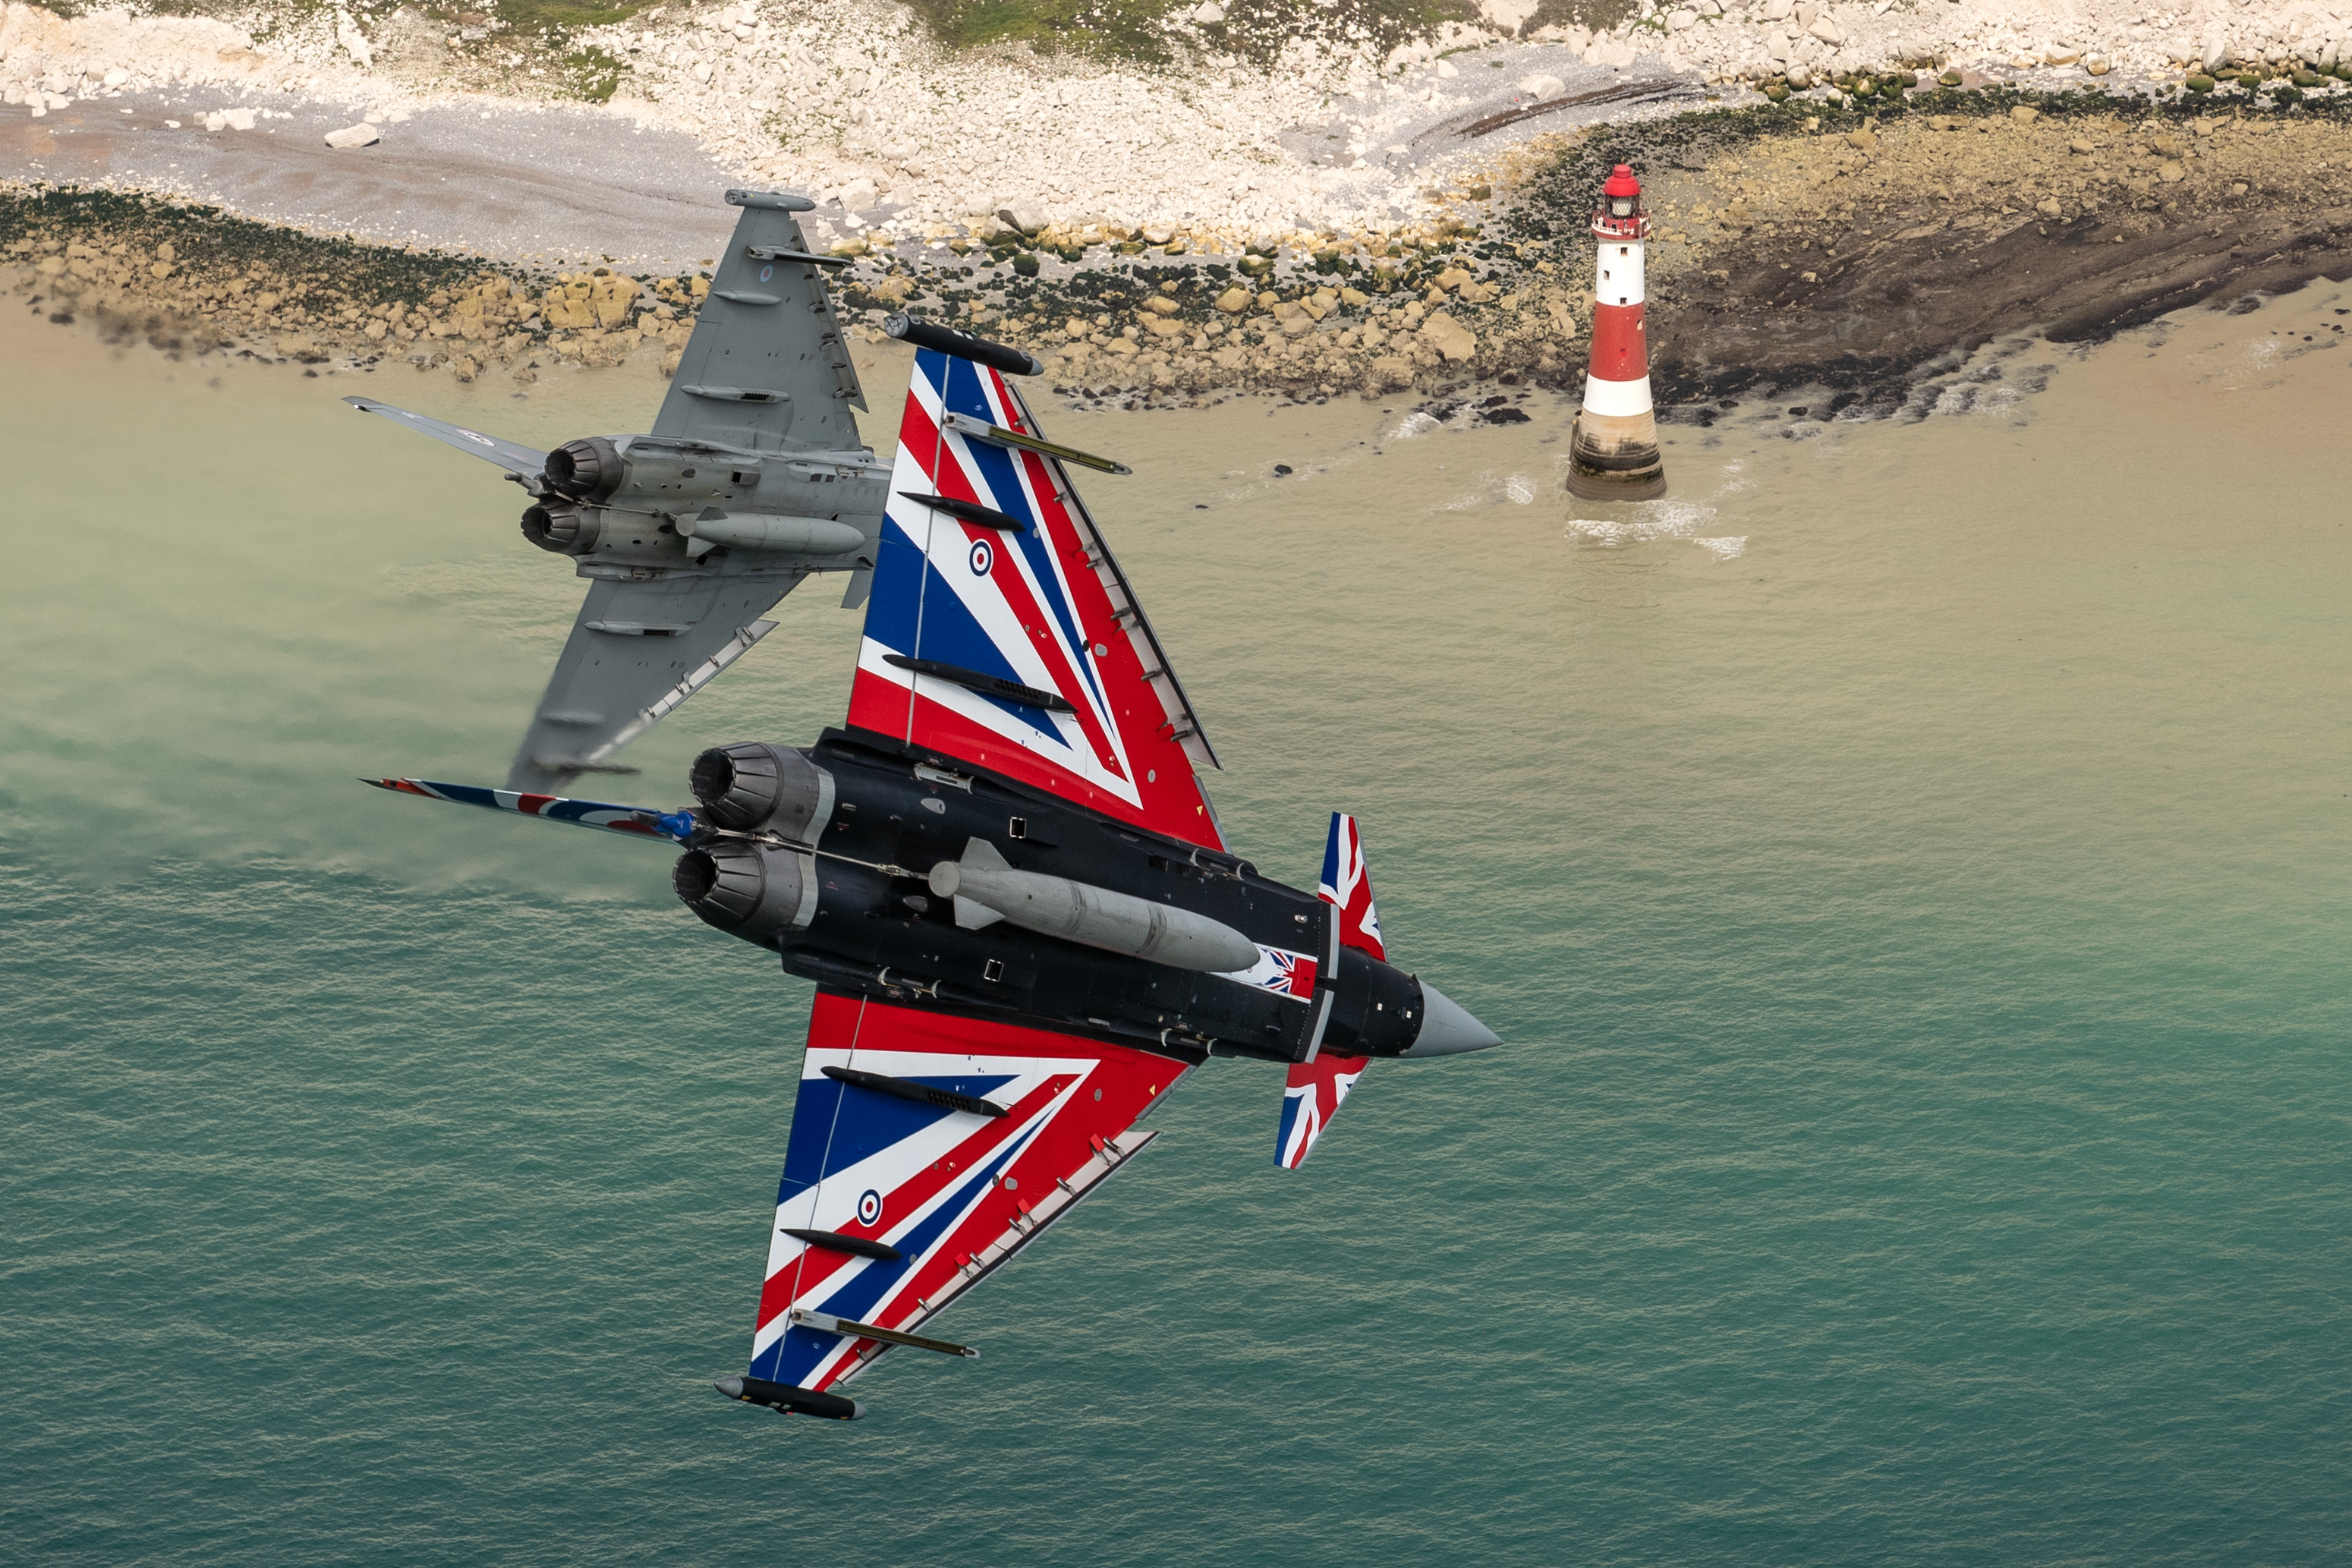 Image shows two Typhoons with Union Jack paint in flight over the white cliffs.